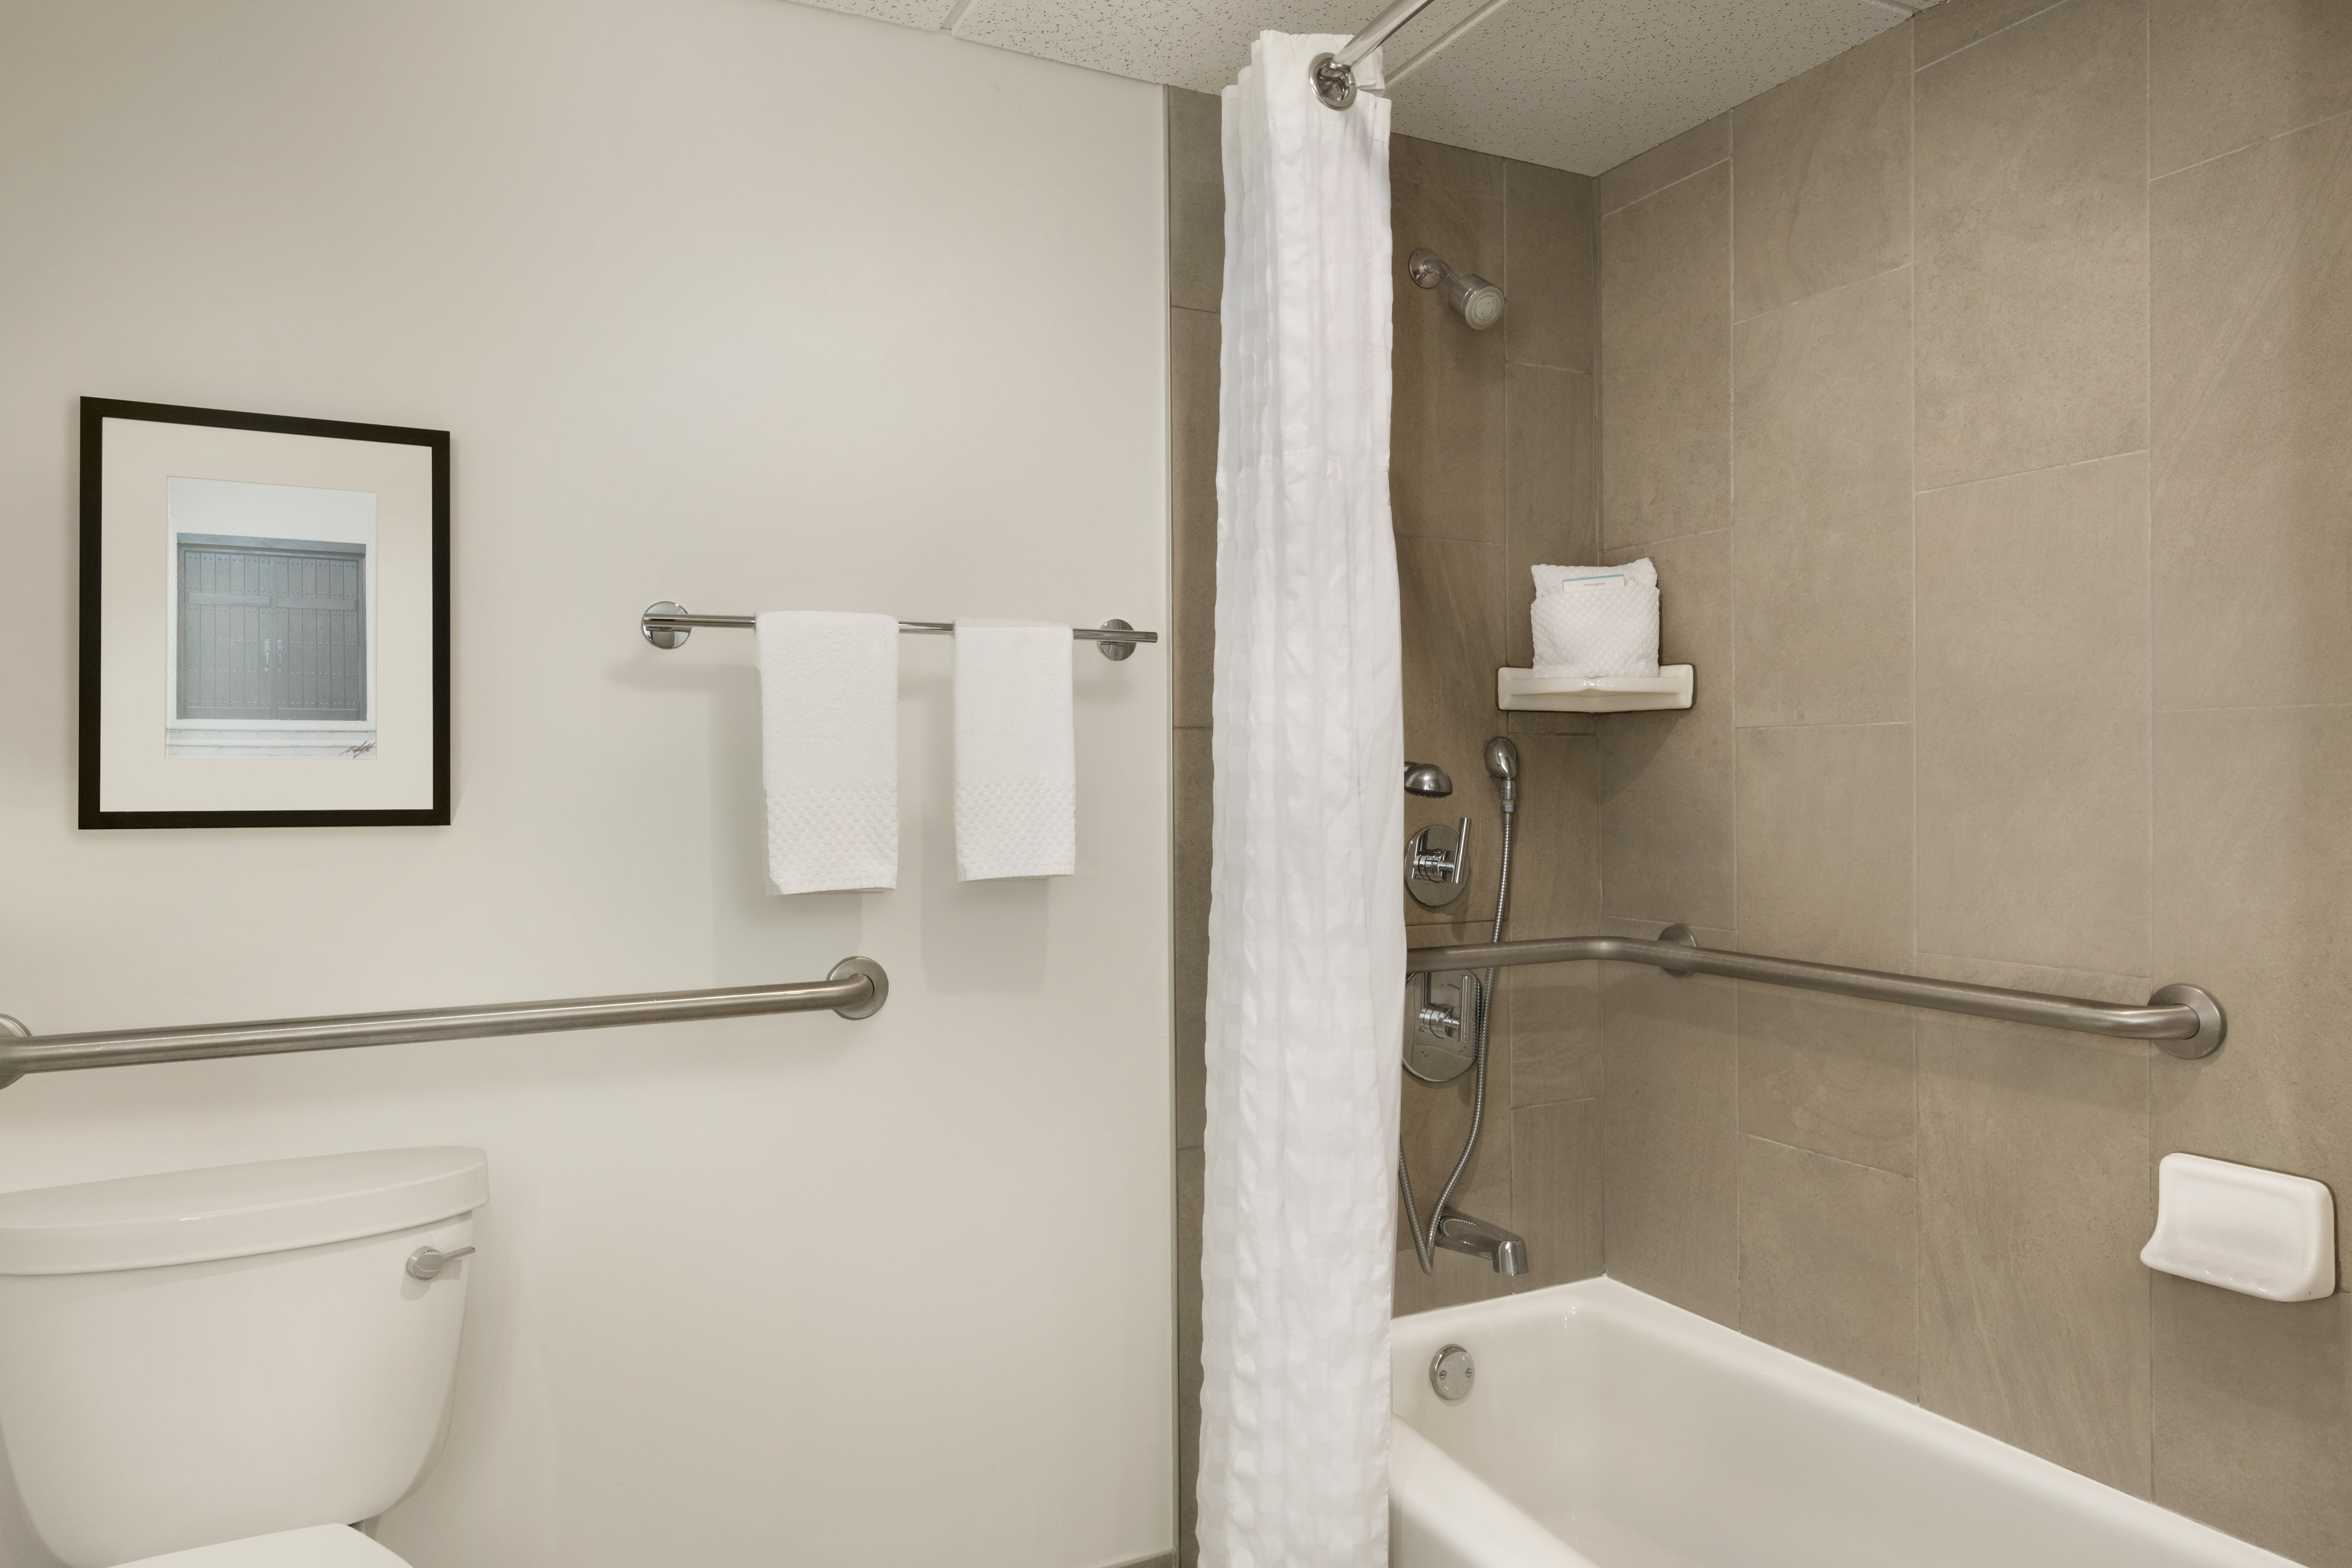 Wall Art Above Toilet With Grab Bars, Fresh Towels, Bathtub With Grab Bars and Handheld Showerhead in Accessible Bathroom